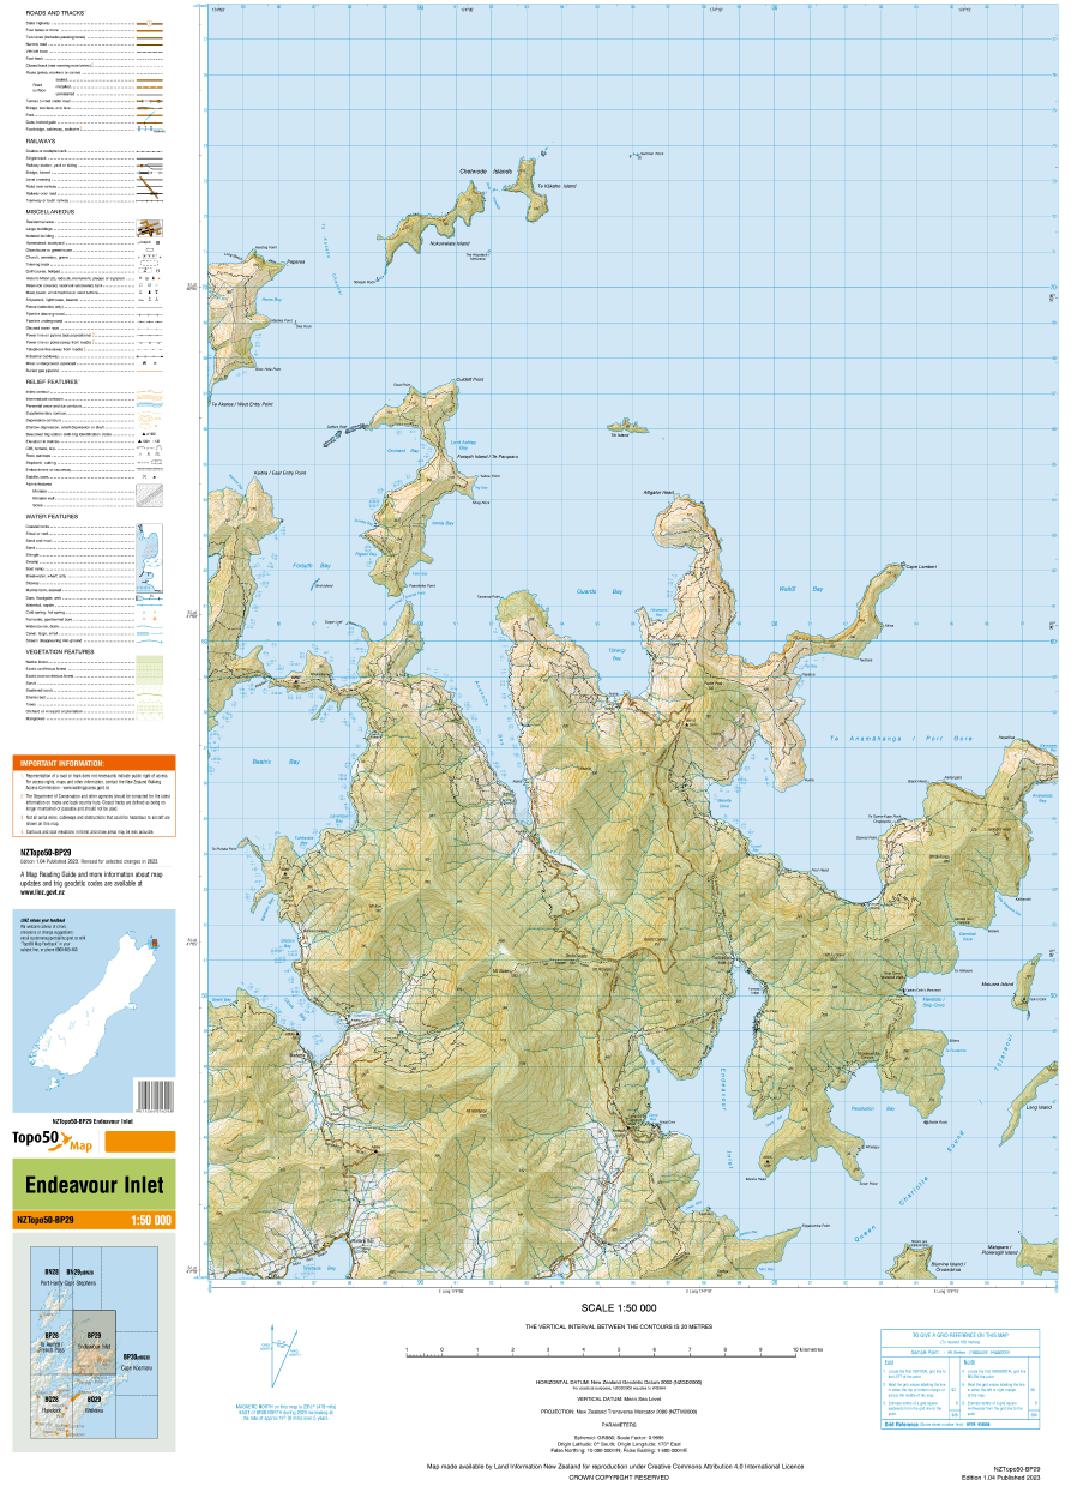 Topo map of Endeavour Inlet